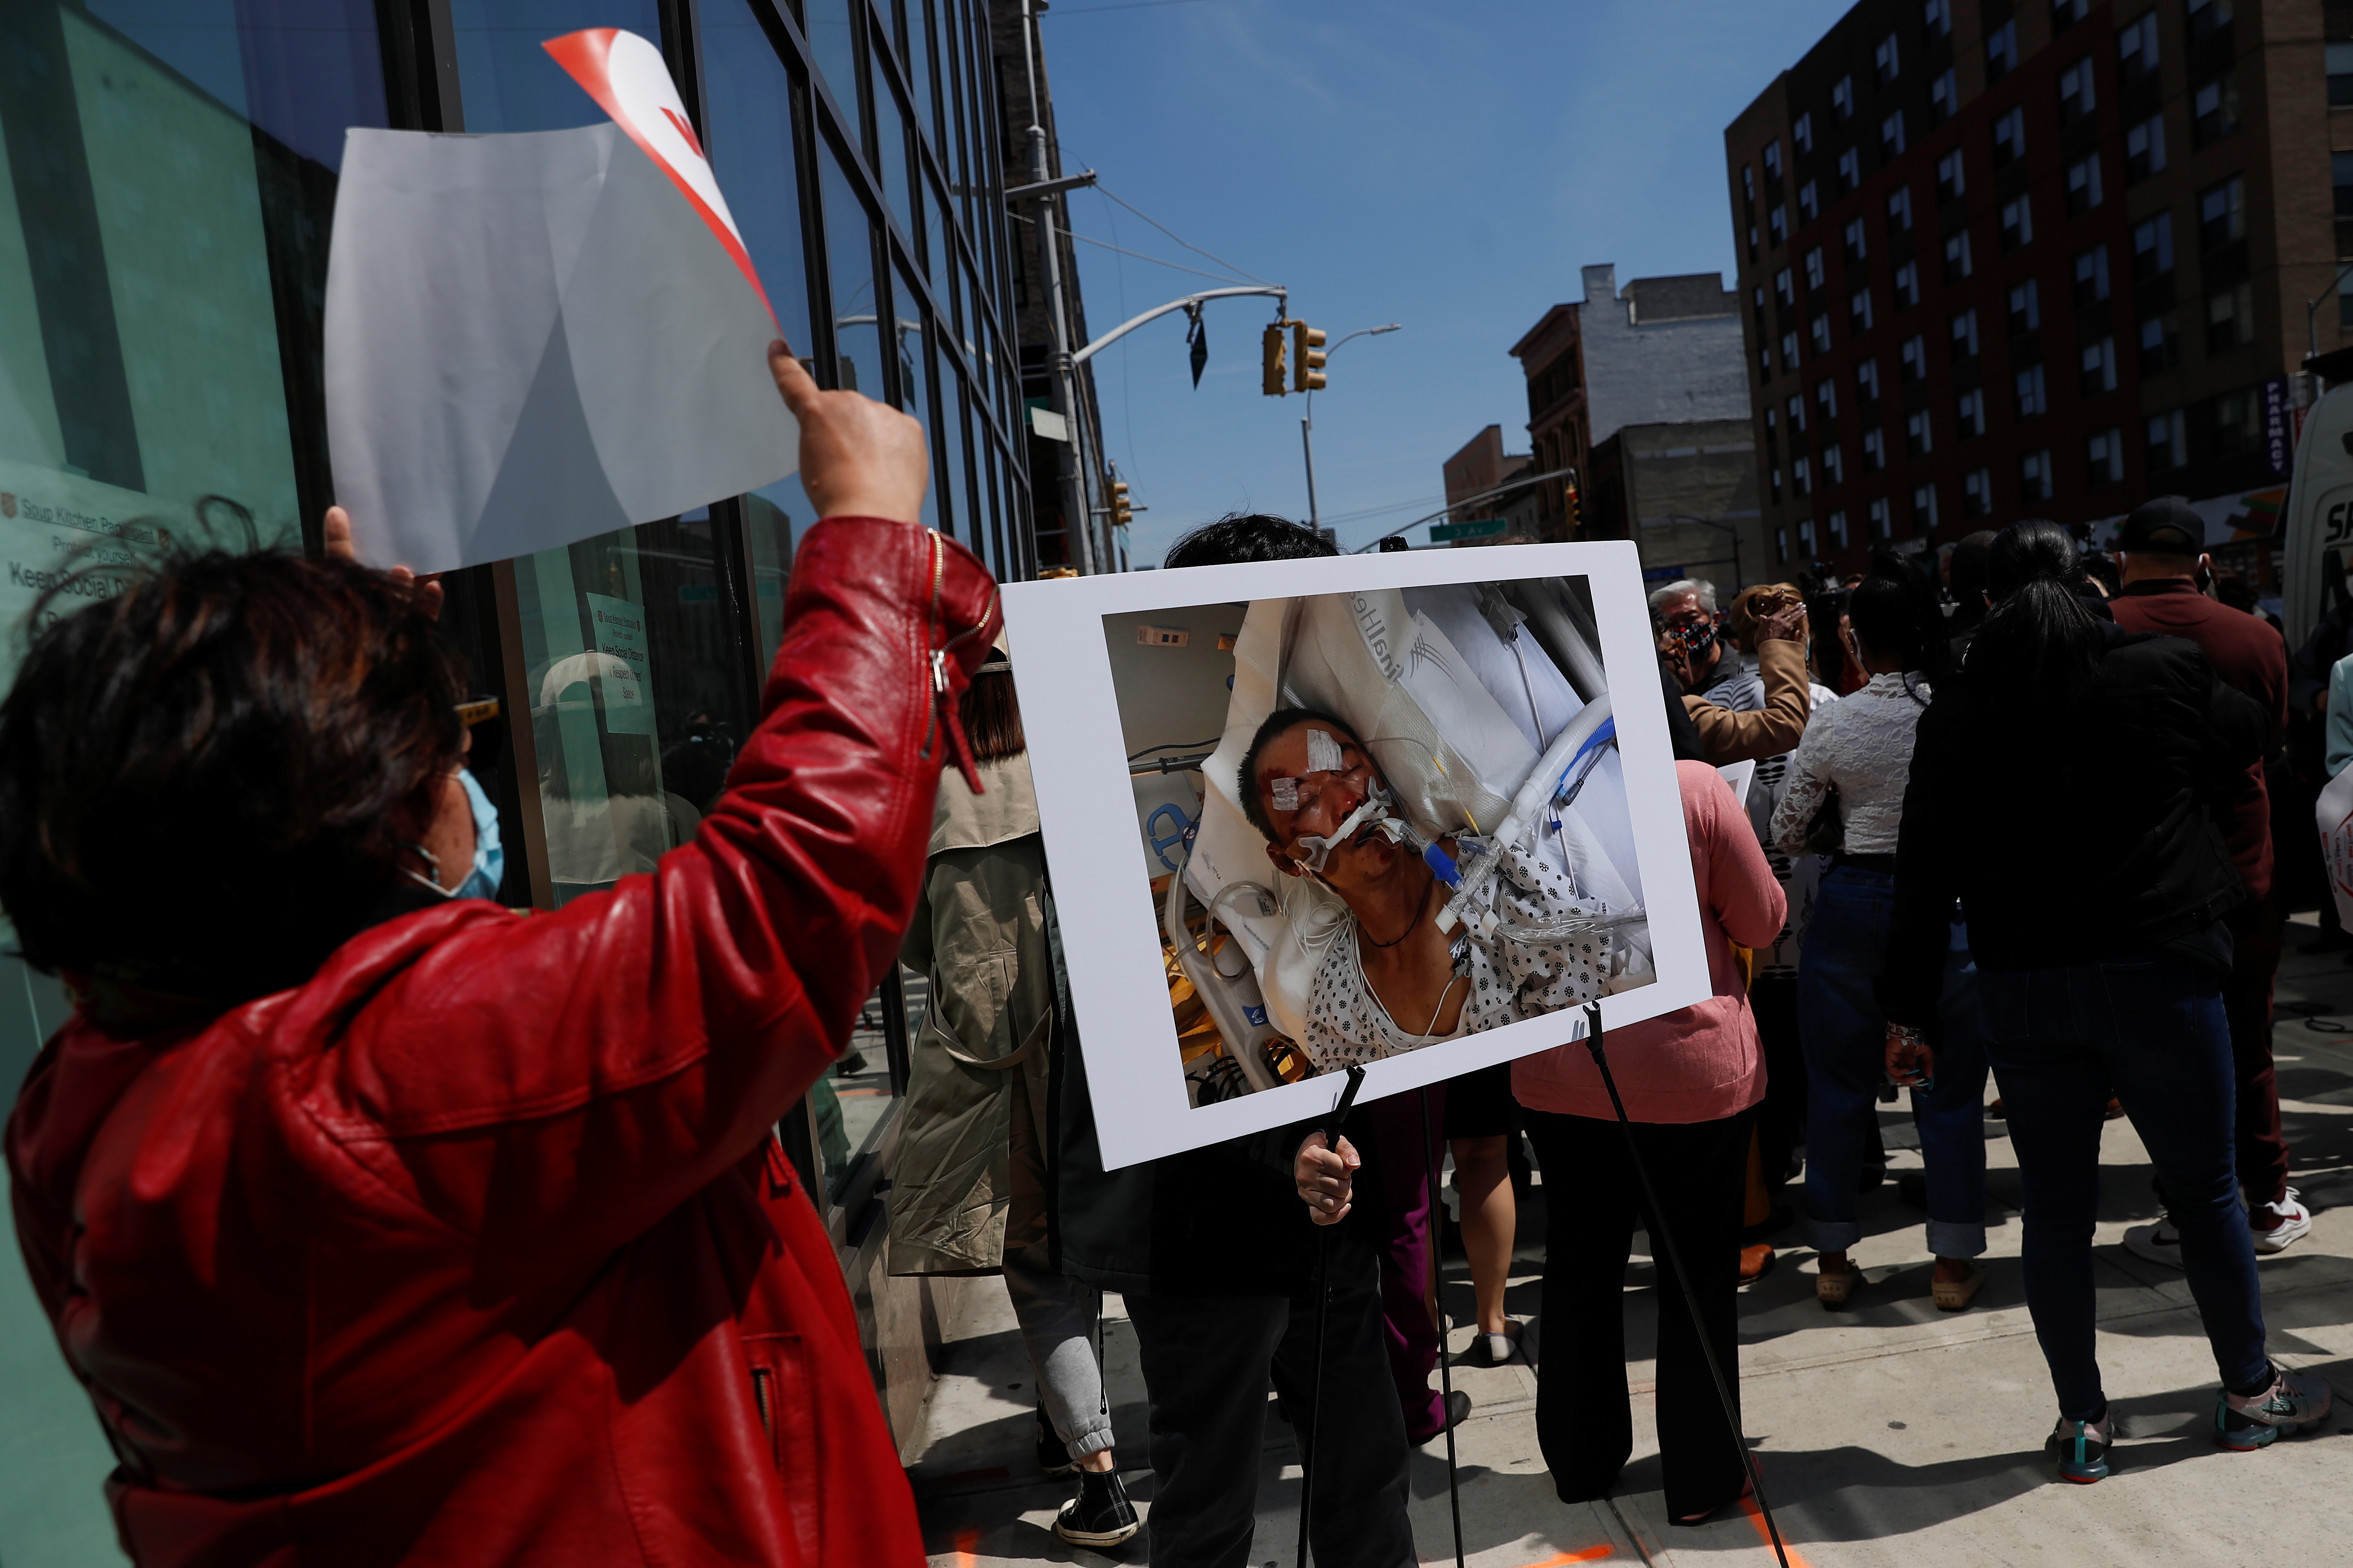 A man carries a photo of Yao Pan Ma in critical condition at a hospital, after being assaulted on April 23rd in the Harlem neighborhood of Manhattan, during a press conference in New York City